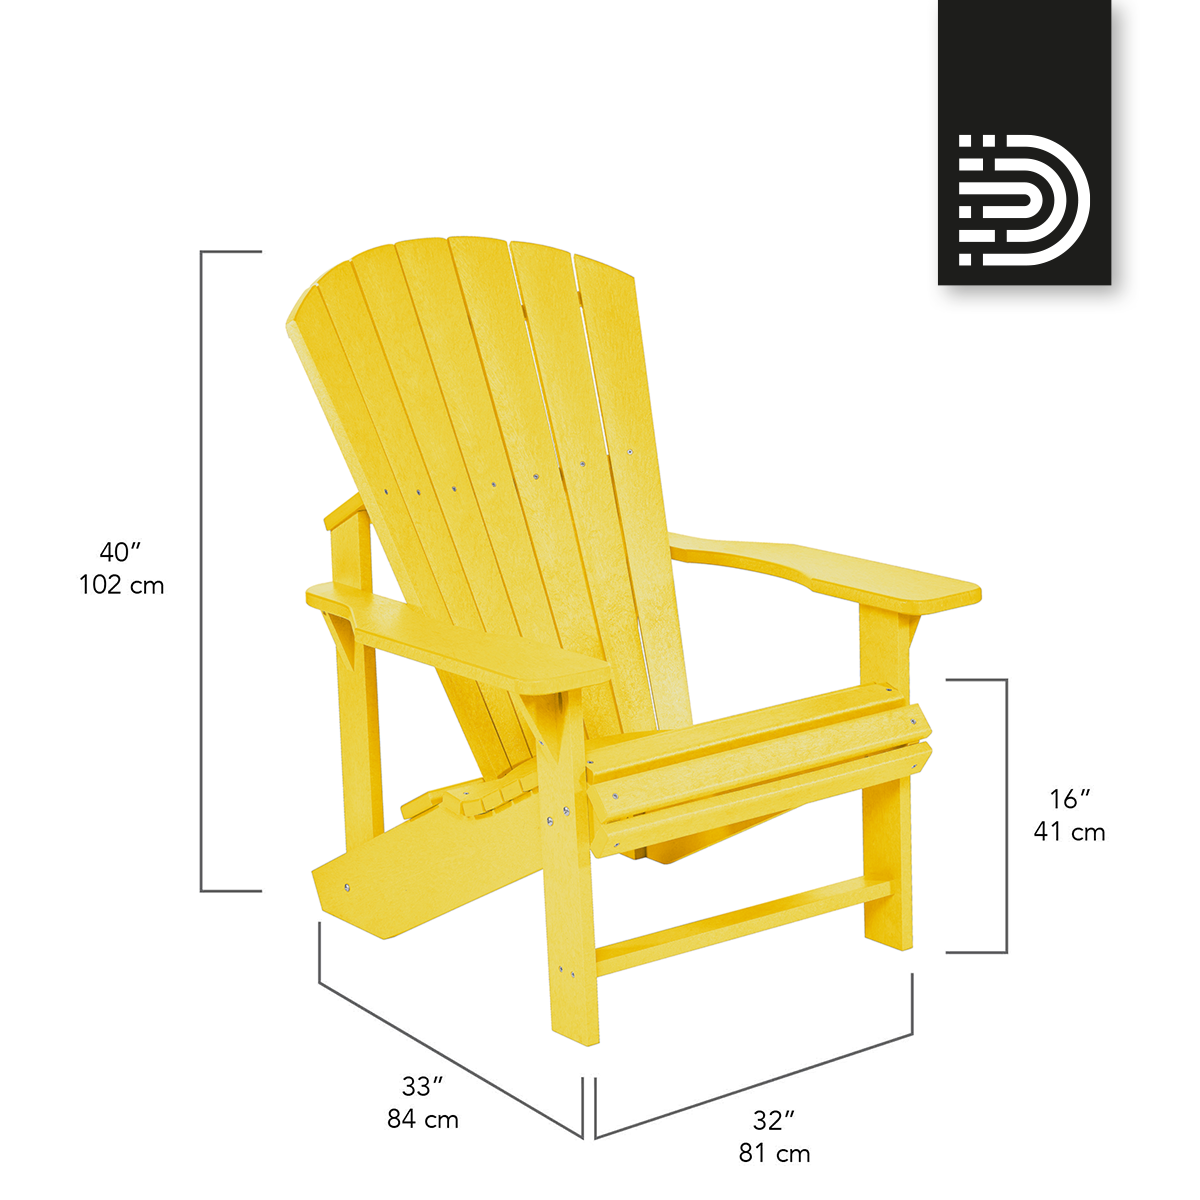  C01 Classic Adirondack Chair - Forest Green 06